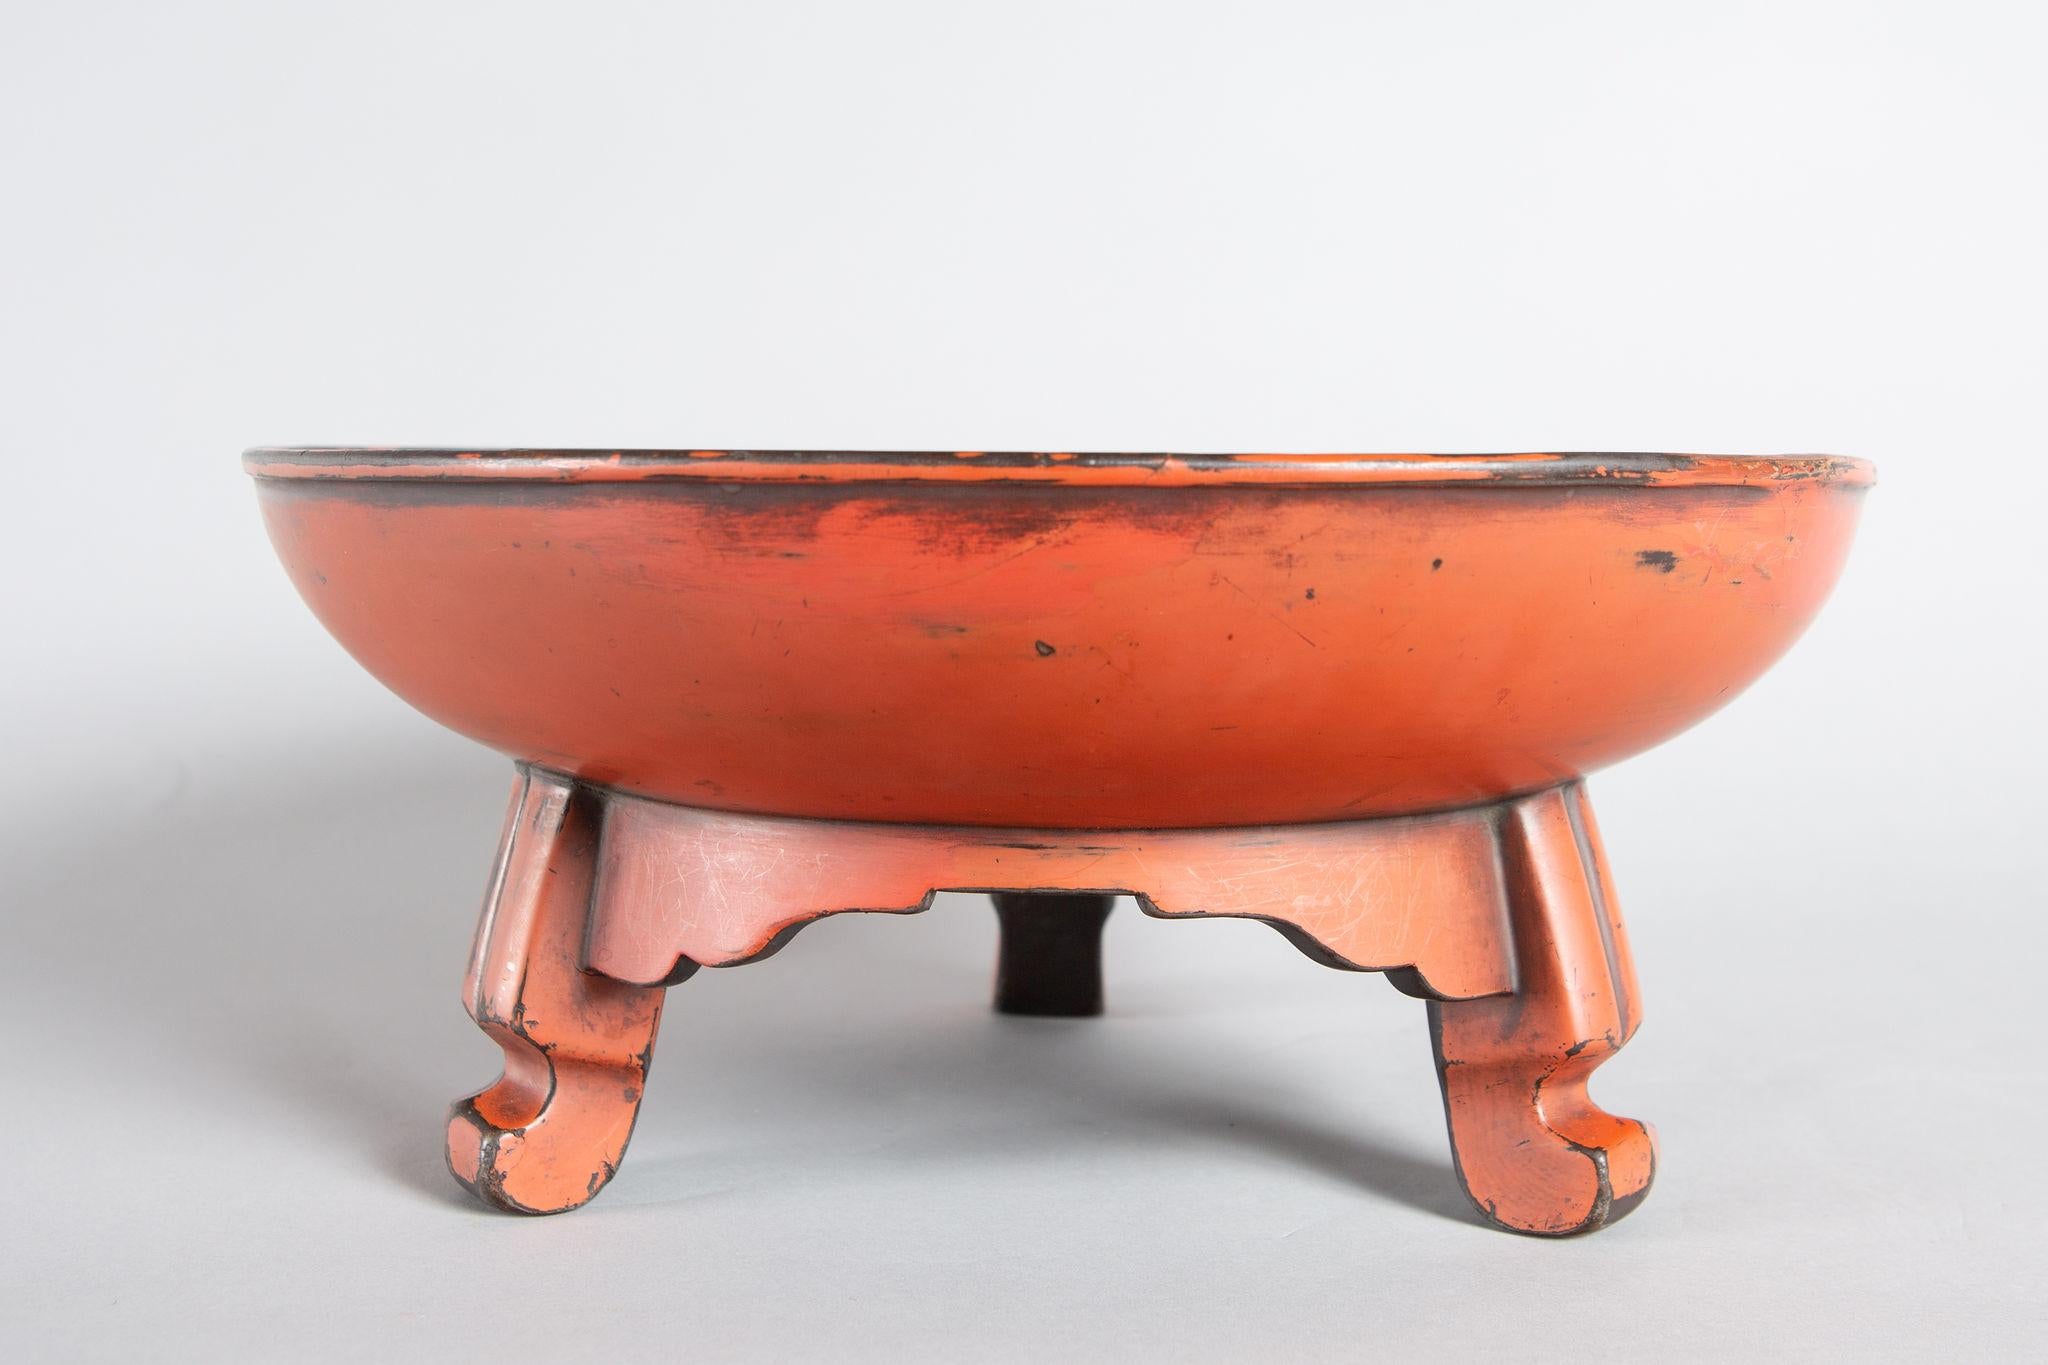 Early 17th century Negoro lacquer footed bowl, Edo period (1603-1868) round bowl with tripod cabriole style legs. Negoro lacquer (monk's lacquer in red with traces of black under lacquer).